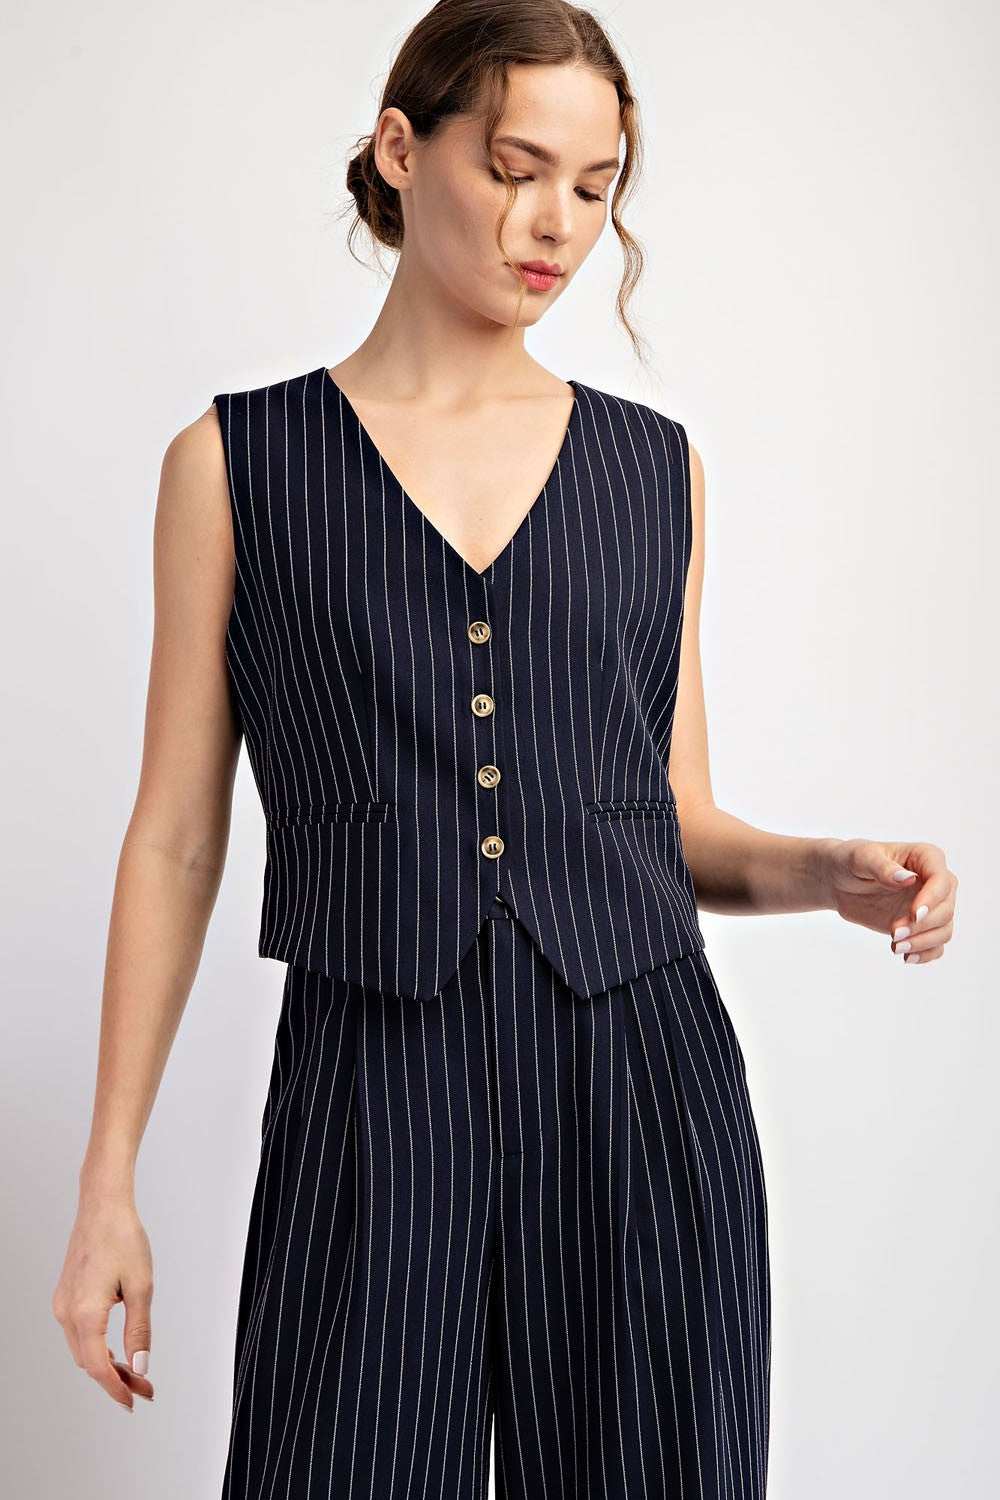 Whitney Pinstriped Sleeveless Vest Top in Navy